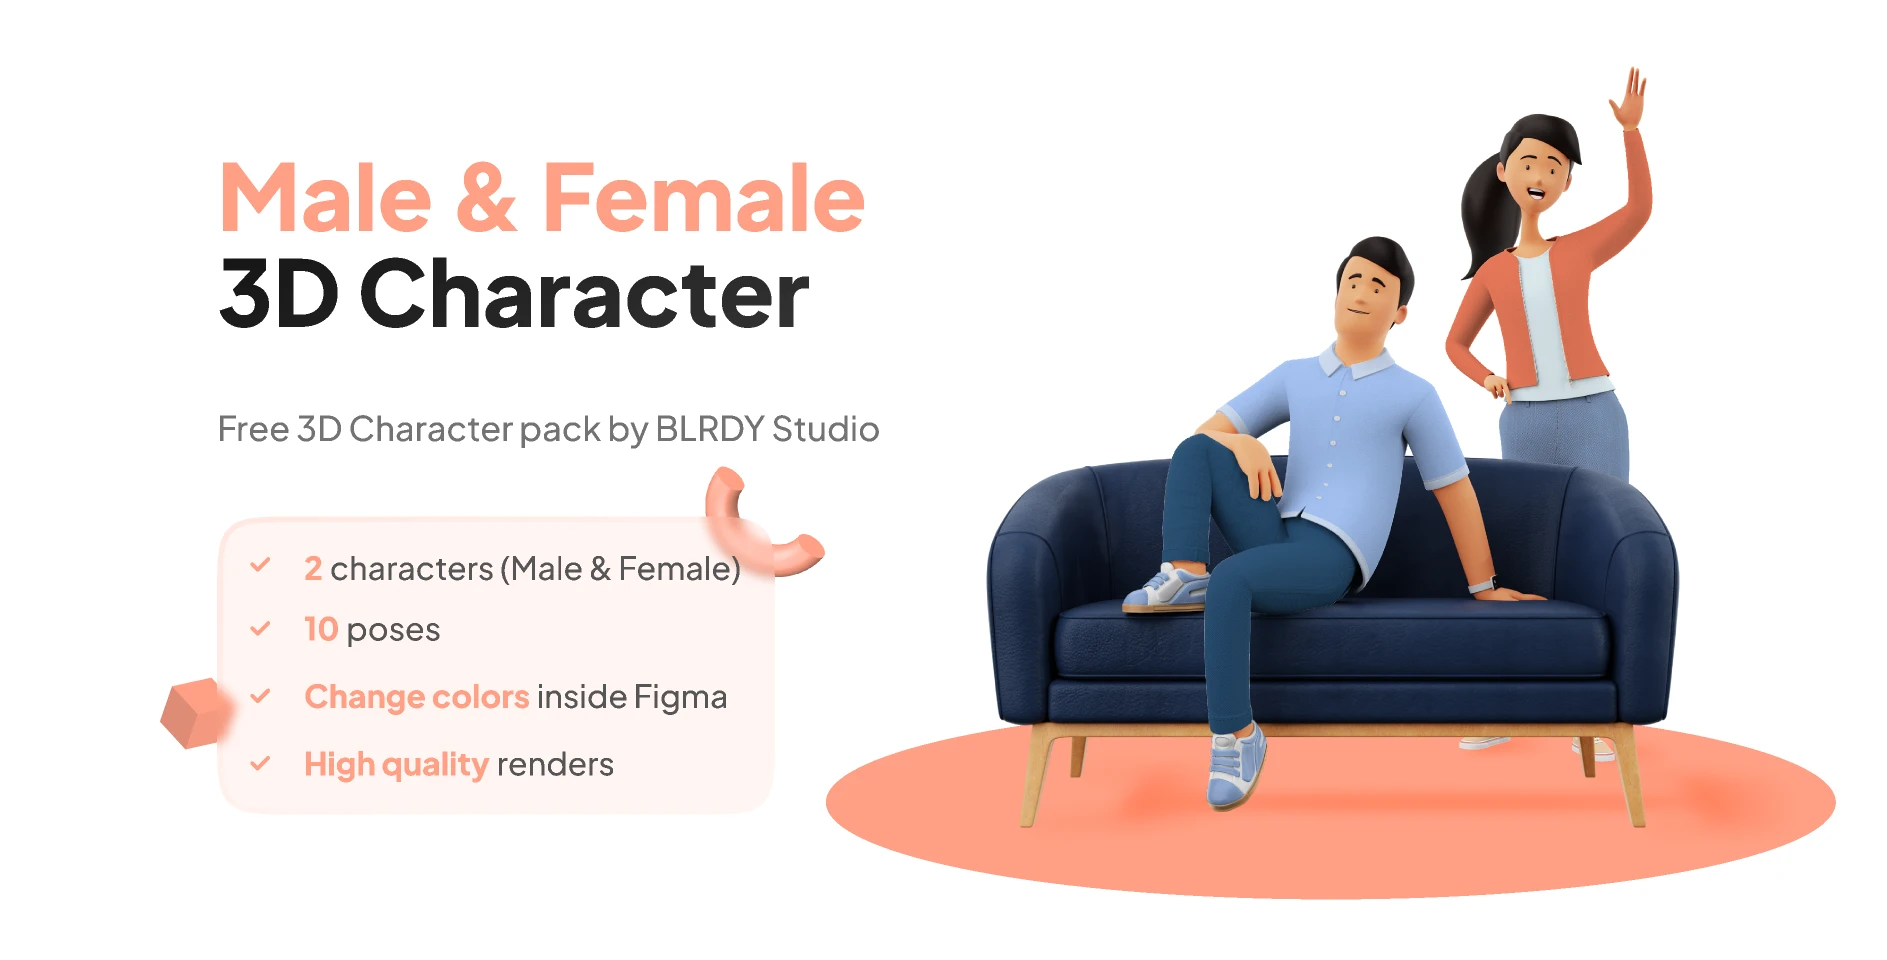 Male & Female 3D Character Pack for Figma and Adobe XD